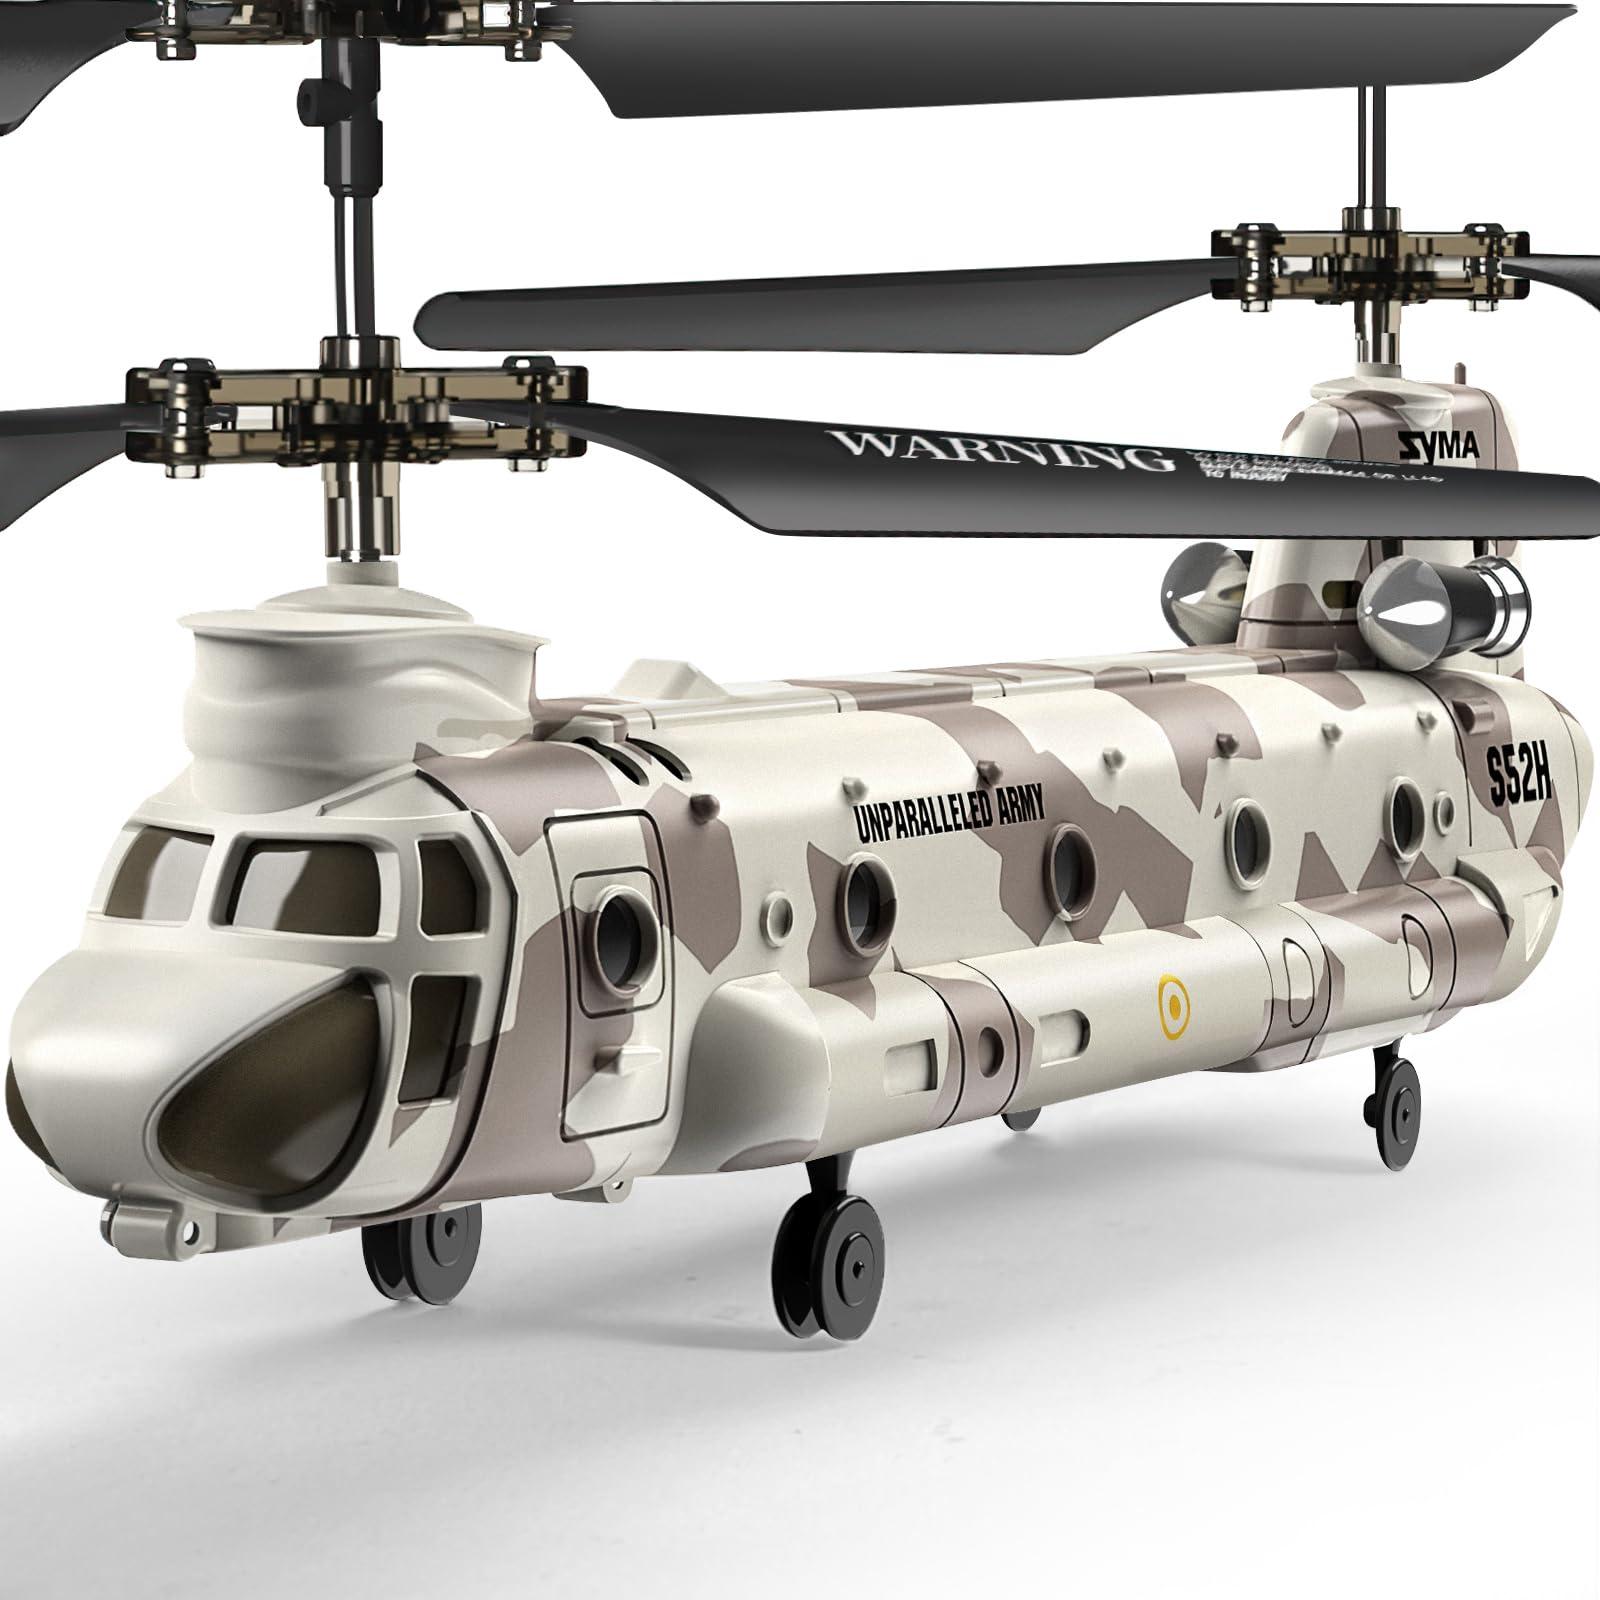 Syma S34 Chinook Helicopter: Top Benefits of Syma S34 Chinook Helicopter and Where to Buy it